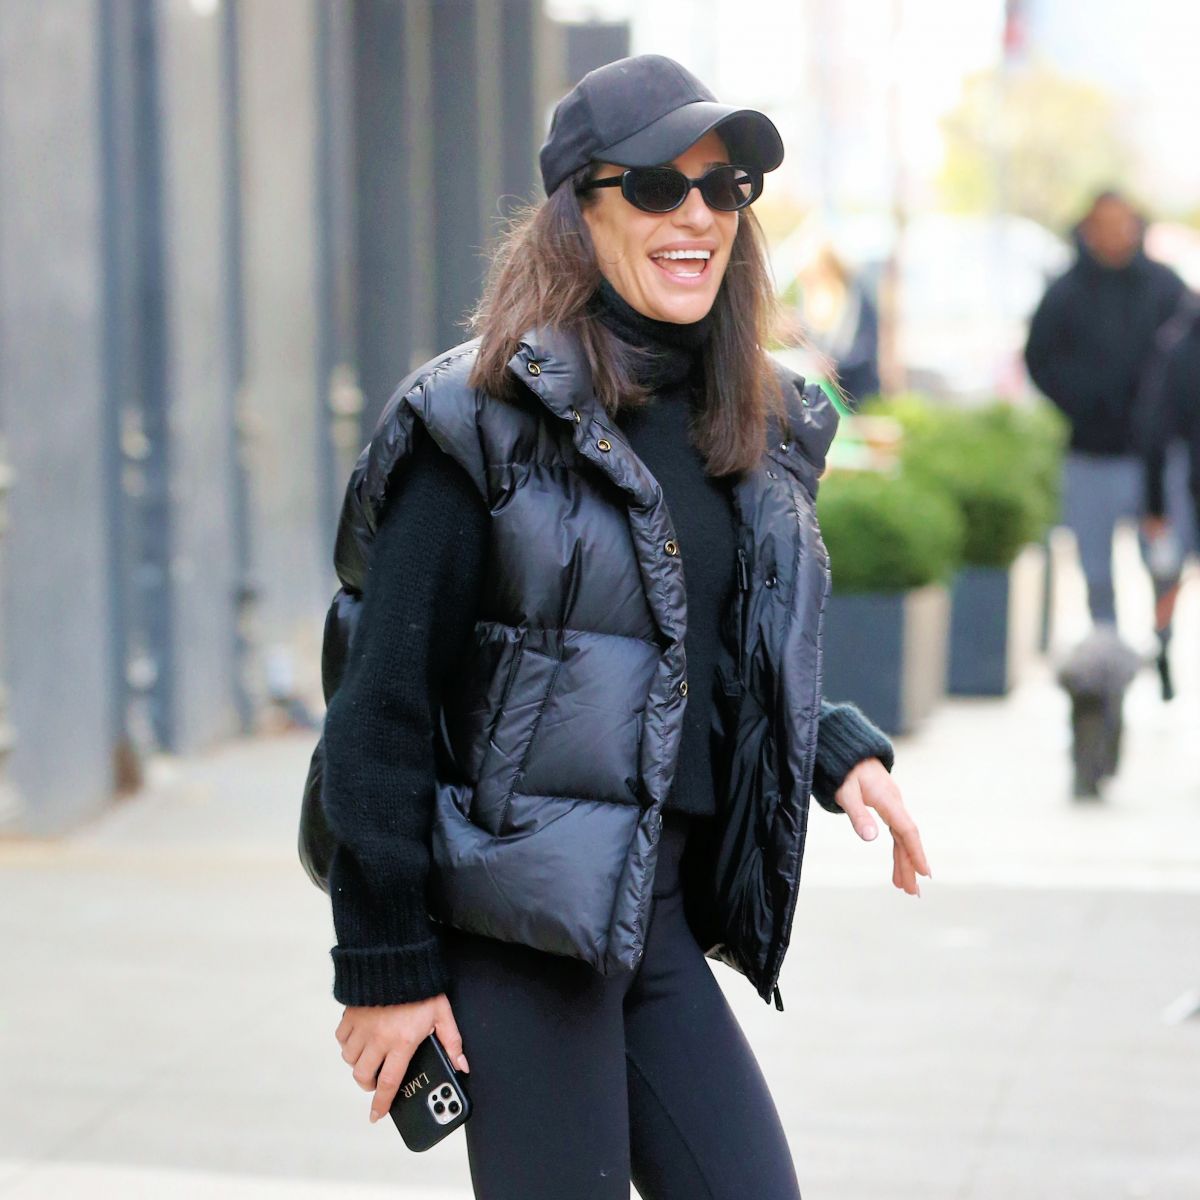 LEA MICHELE Out and About in New York 11/16/2022 – HawtCelebs